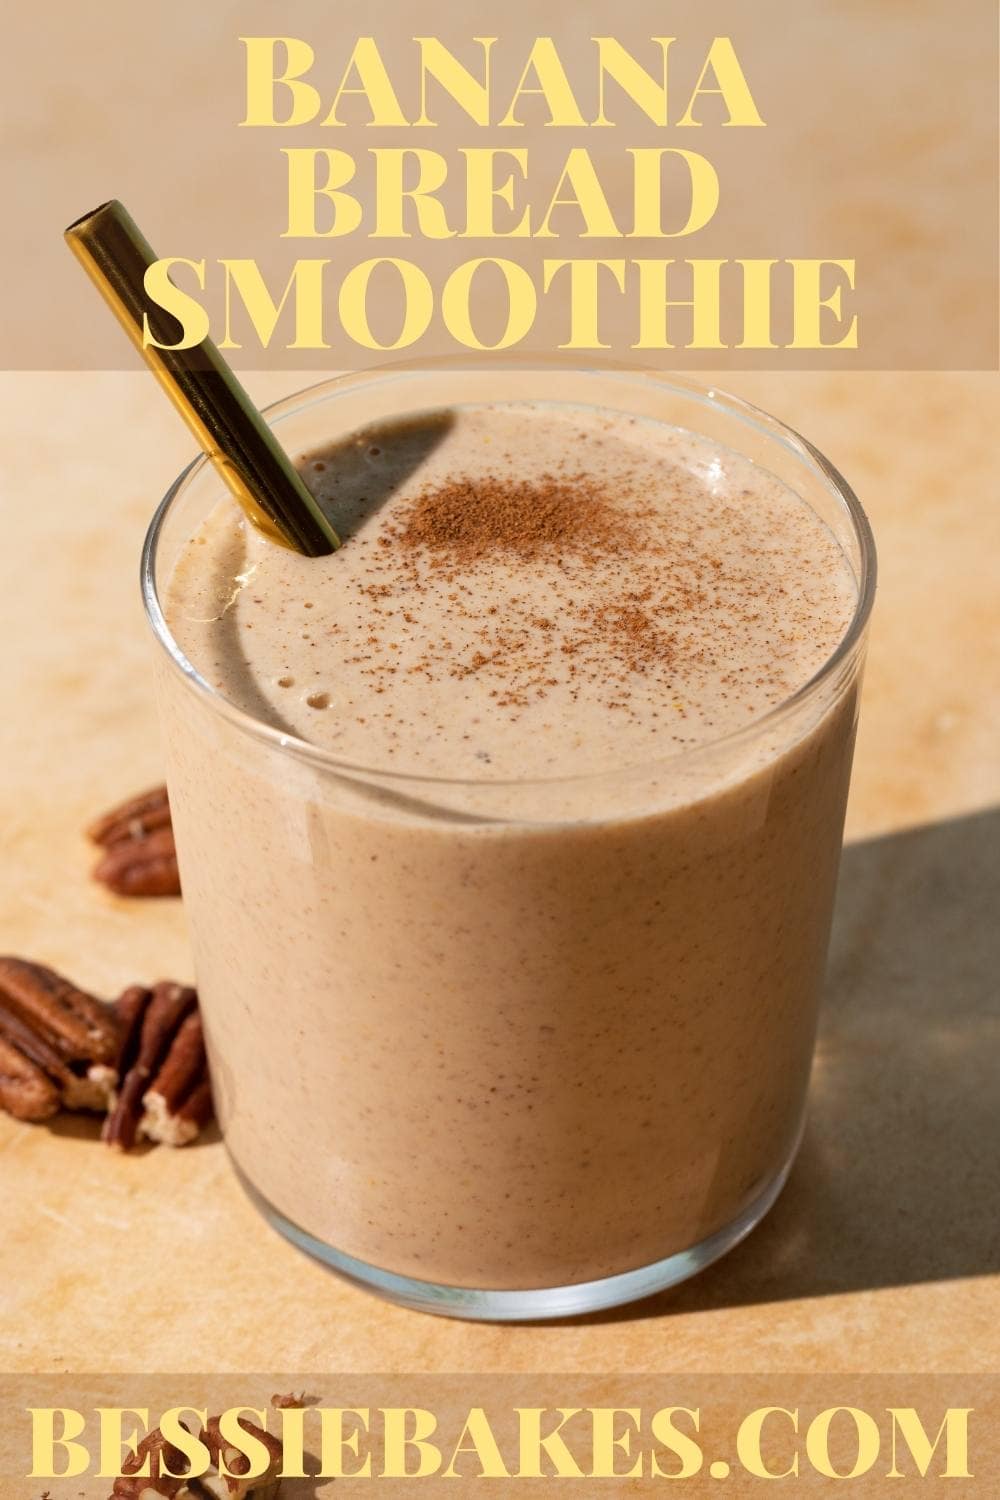 Both delicious and nutritious, this smoothie is jammed packed with great sources of healthy fats thanks to the coconut oil and toasted pecans. via @bessiebakes